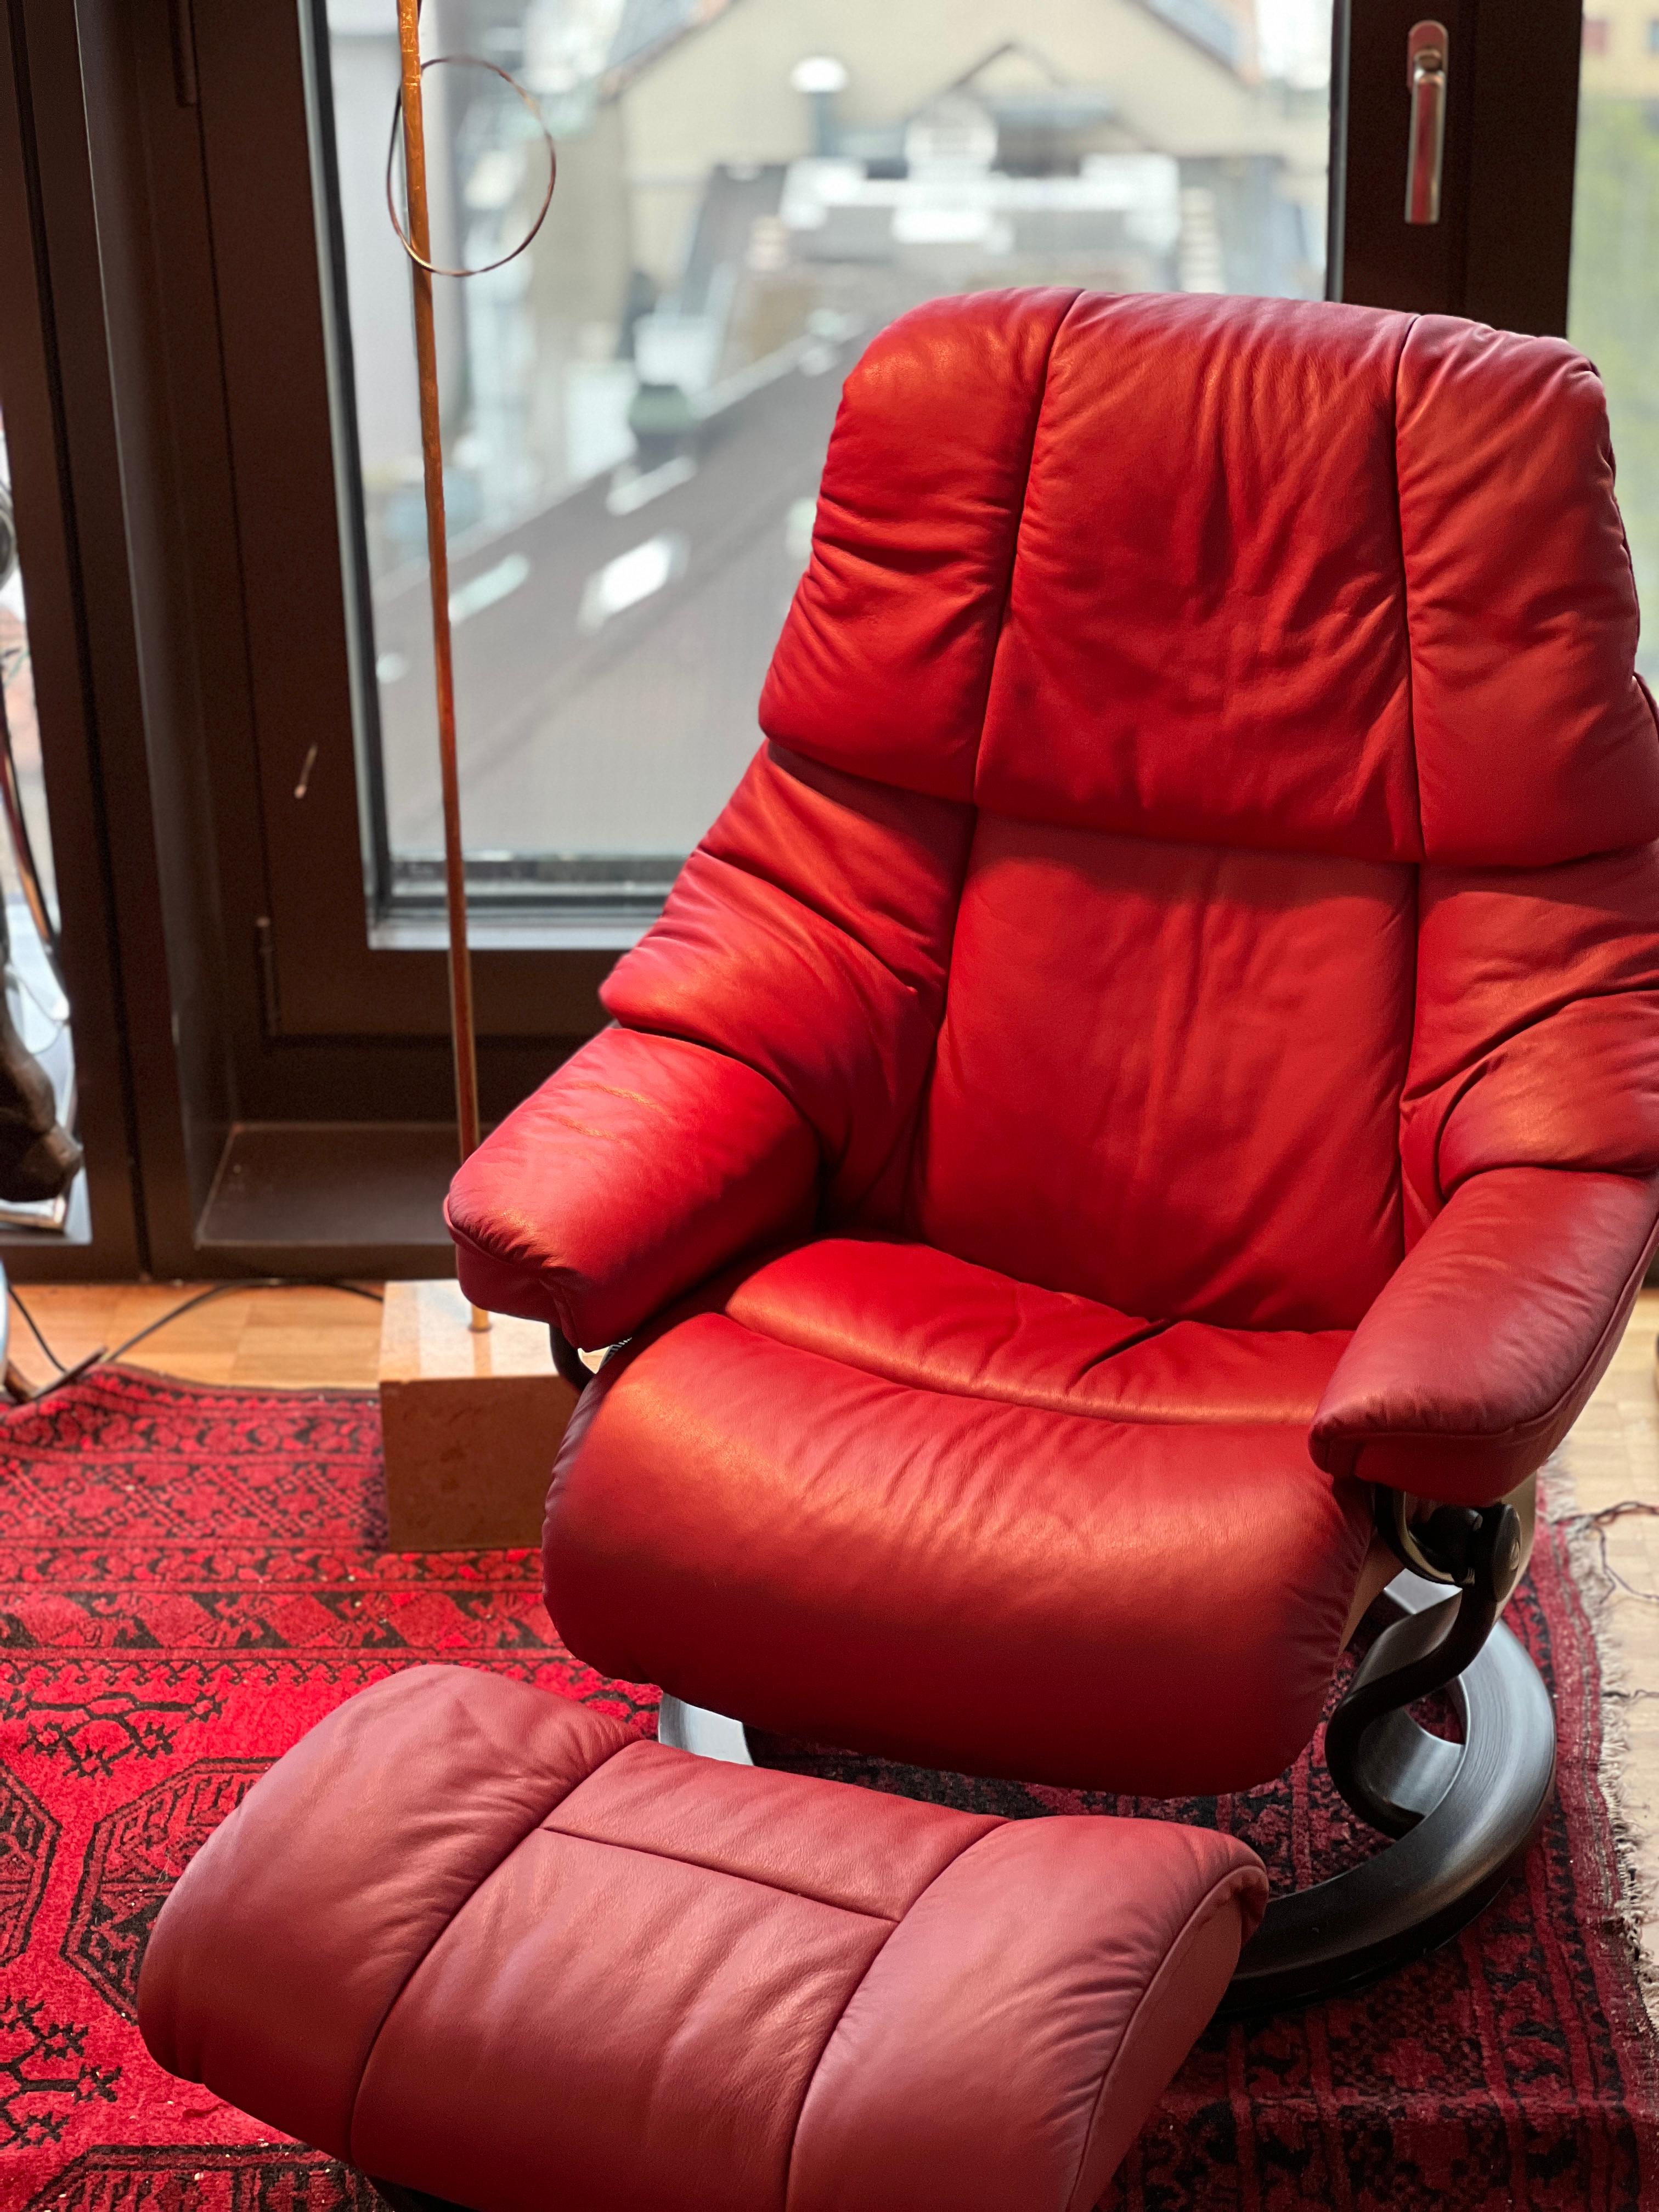 A Scandinavian style recliner and ottoman by Ekornes, Norway. This chair belongs to the top line of their Stressless brand. With teak wood bases and metal frame and genuine leather upholstery, this is a comfortable burgundy color leather recliner